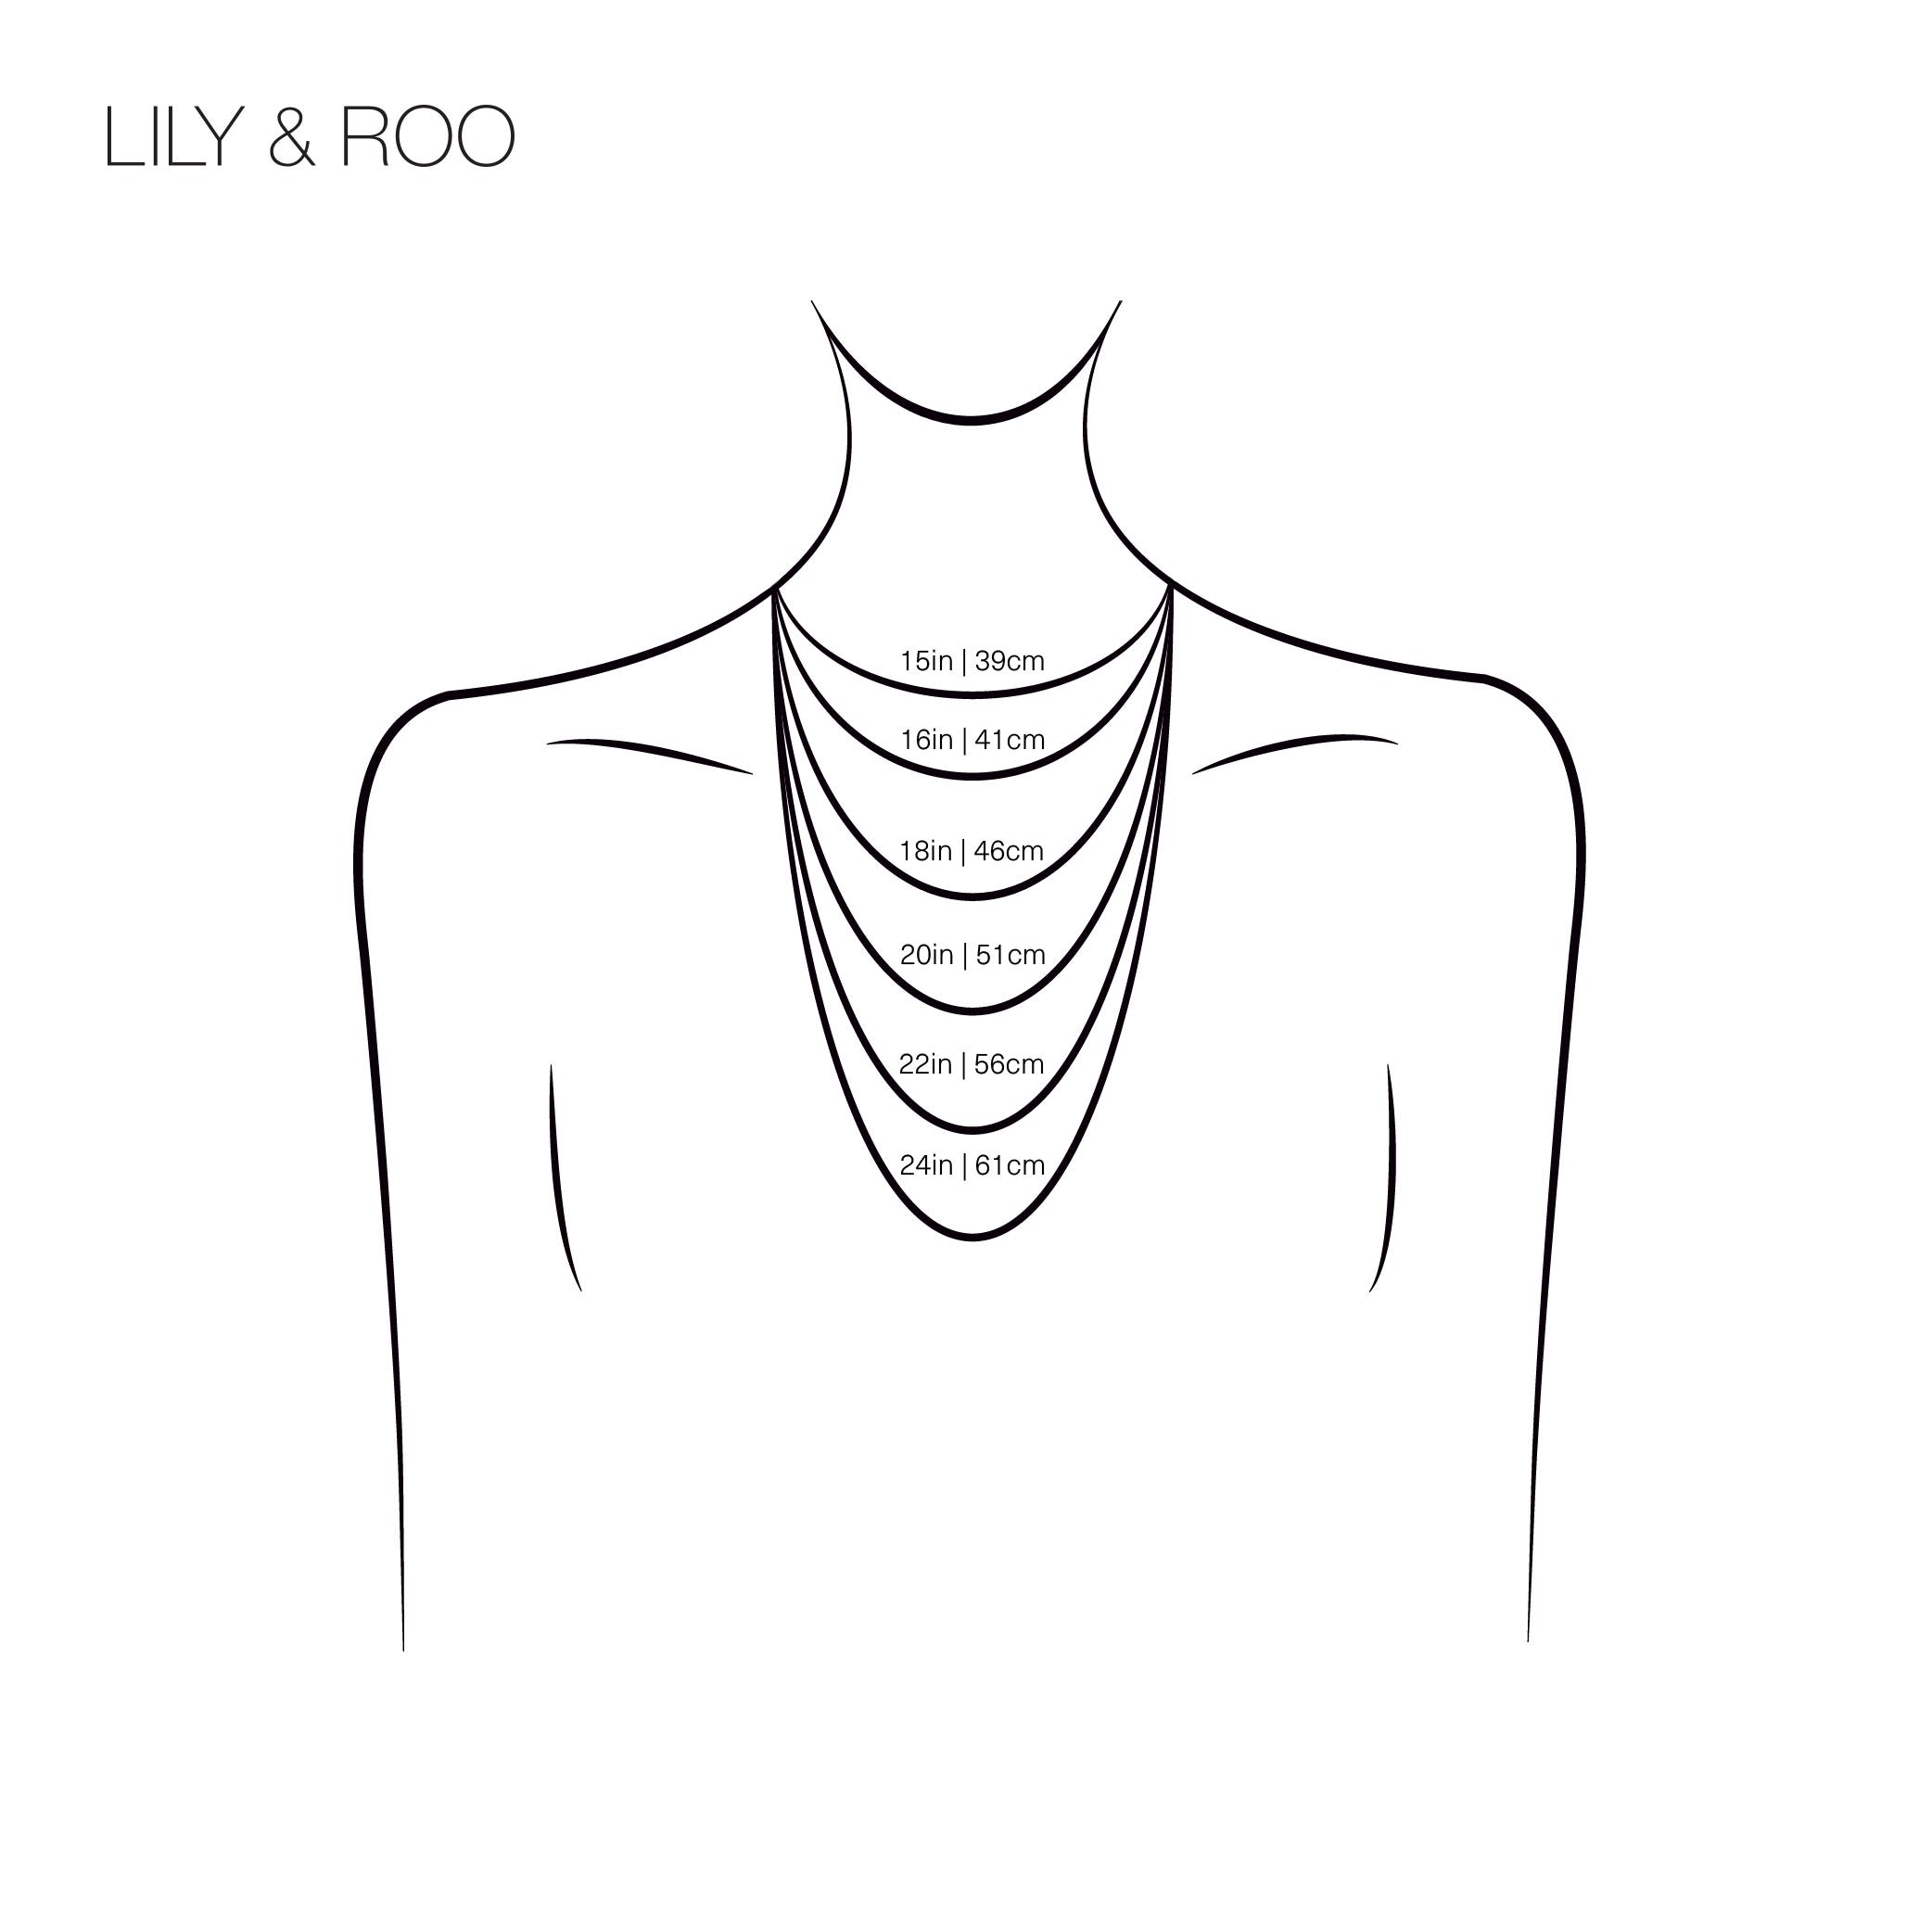 Necklaces drawn around a neck and chest silhouette with the chain lengths labelled